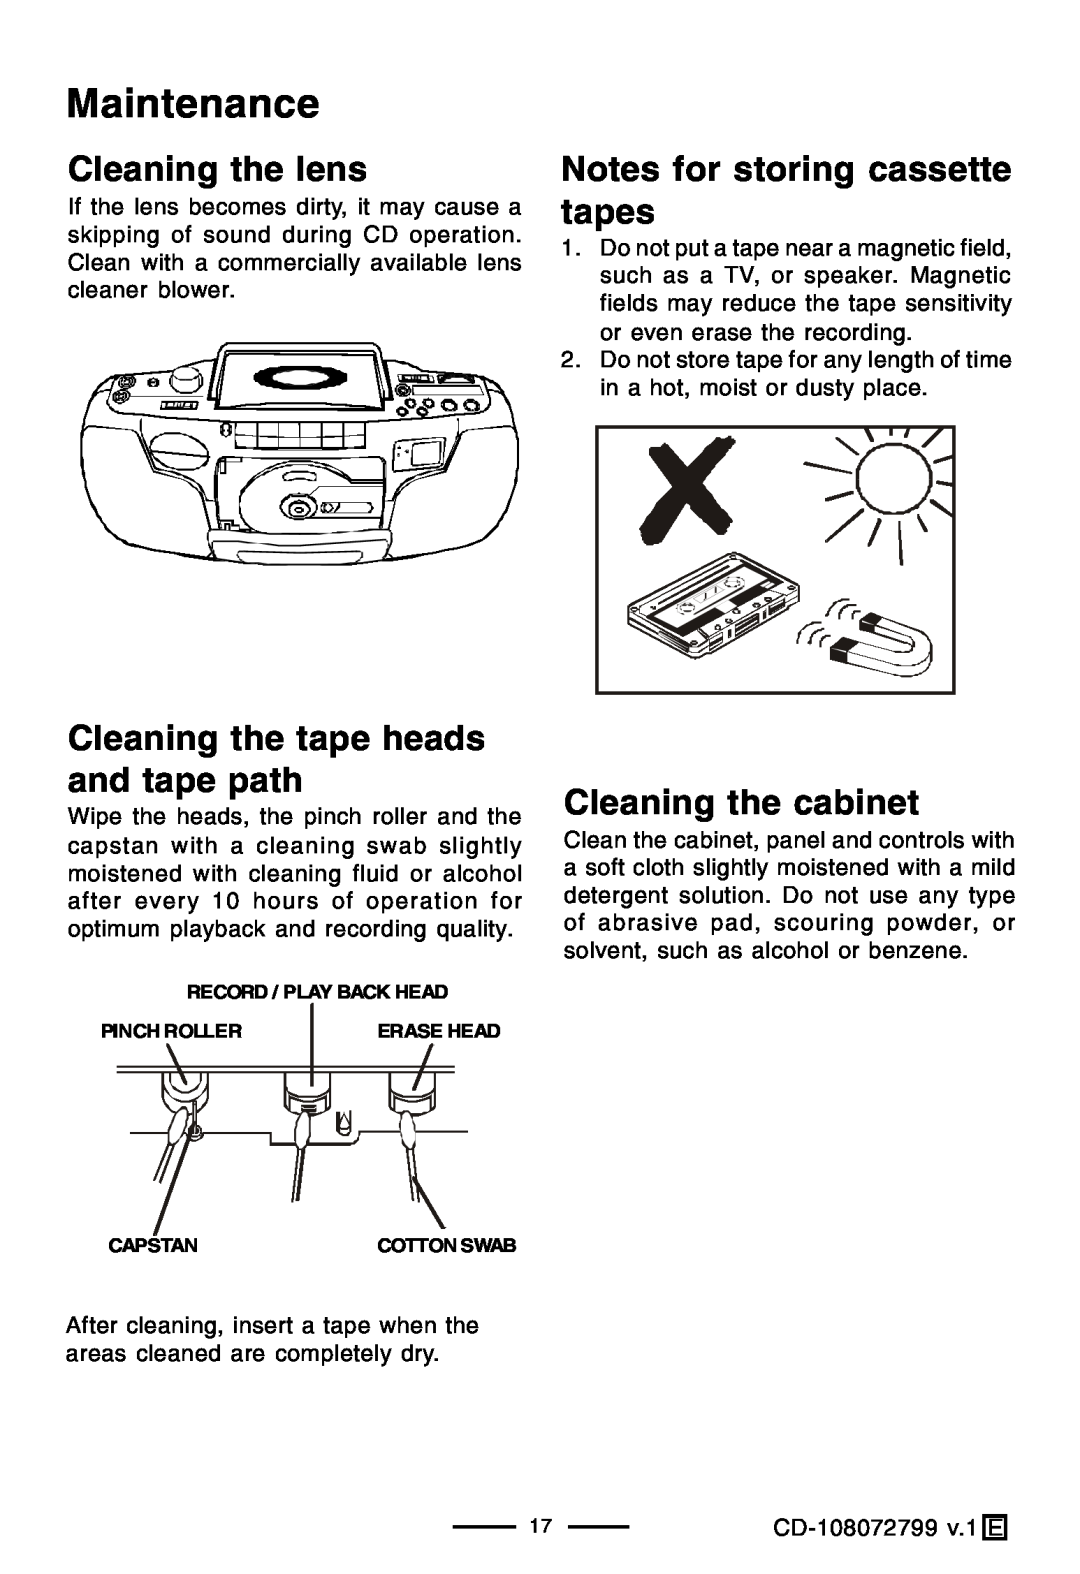 Lenoxx Electronics CD-108 Maintenance, Cleaning the lens, Cleaning the tape heads and tape path, Cleaning the cabinet 